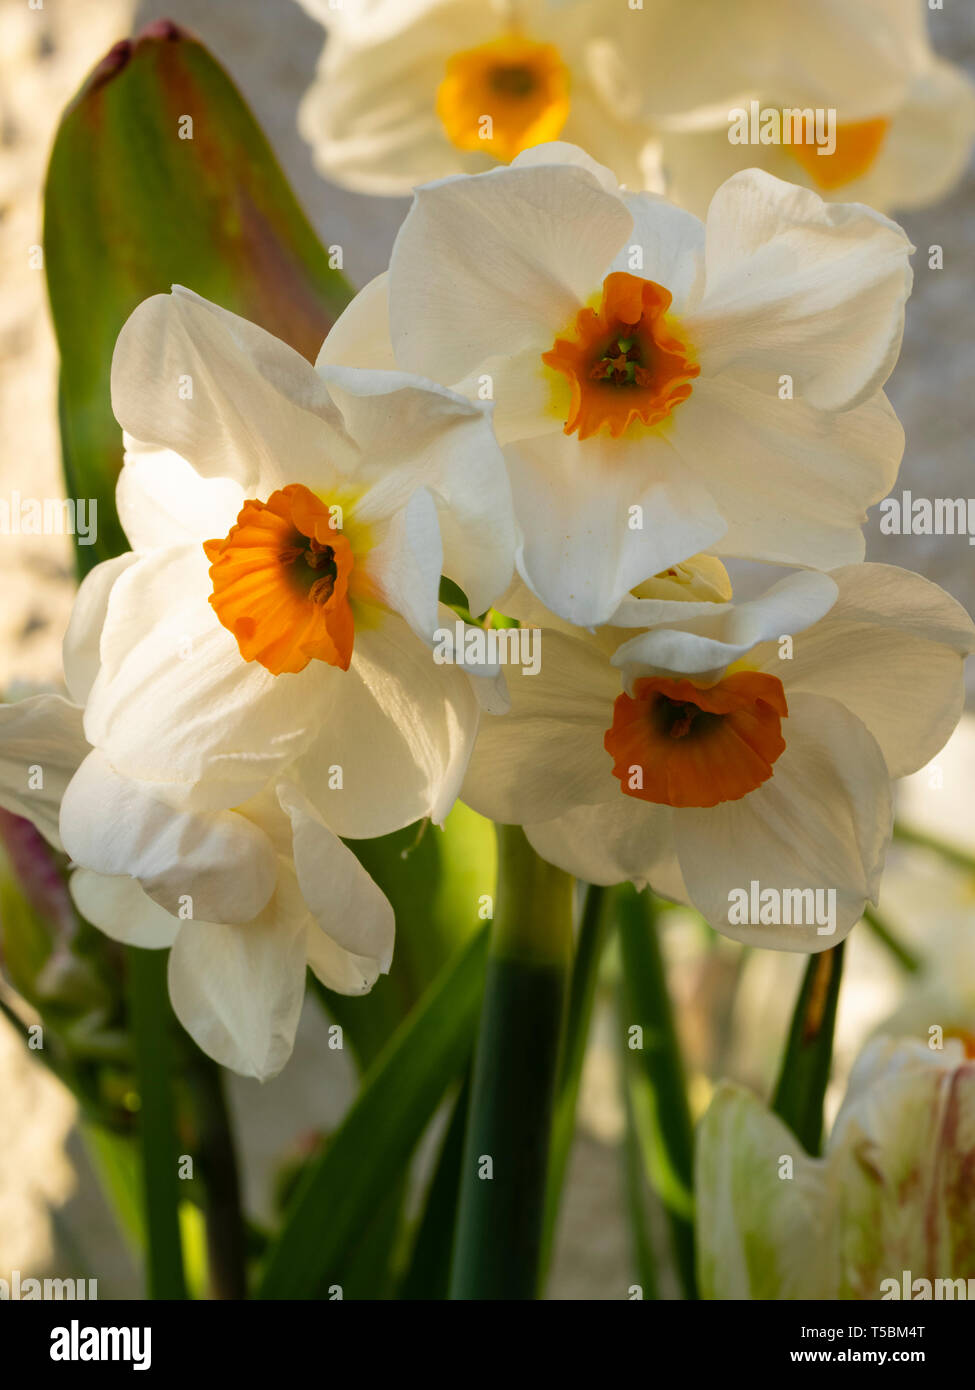 Pure white petals and an orange cup of the fragrant, multi headed, spring flowering hardy bulb, Narcissus tazetta 'Cragford' Stock Photo